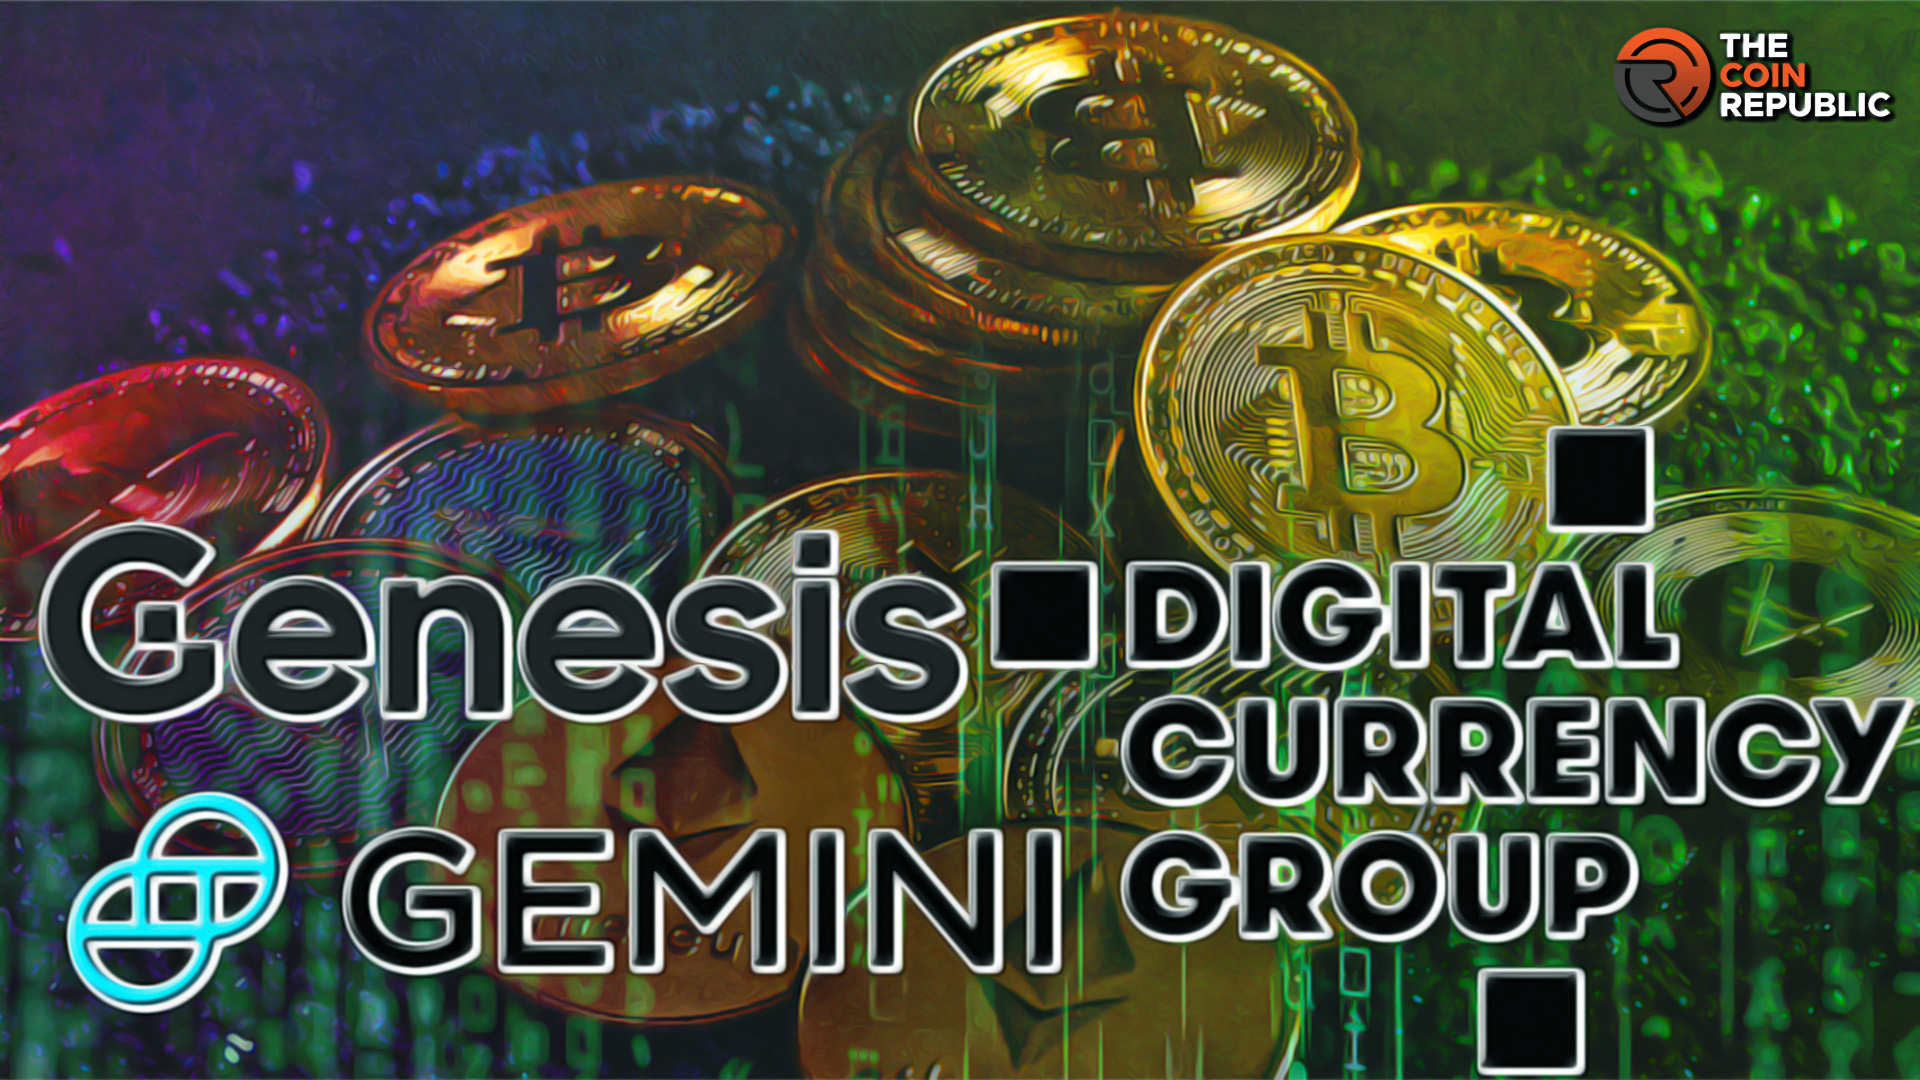 Gemini, Genesis, and DCG to Face $1B Lawsuit from NY Attorney